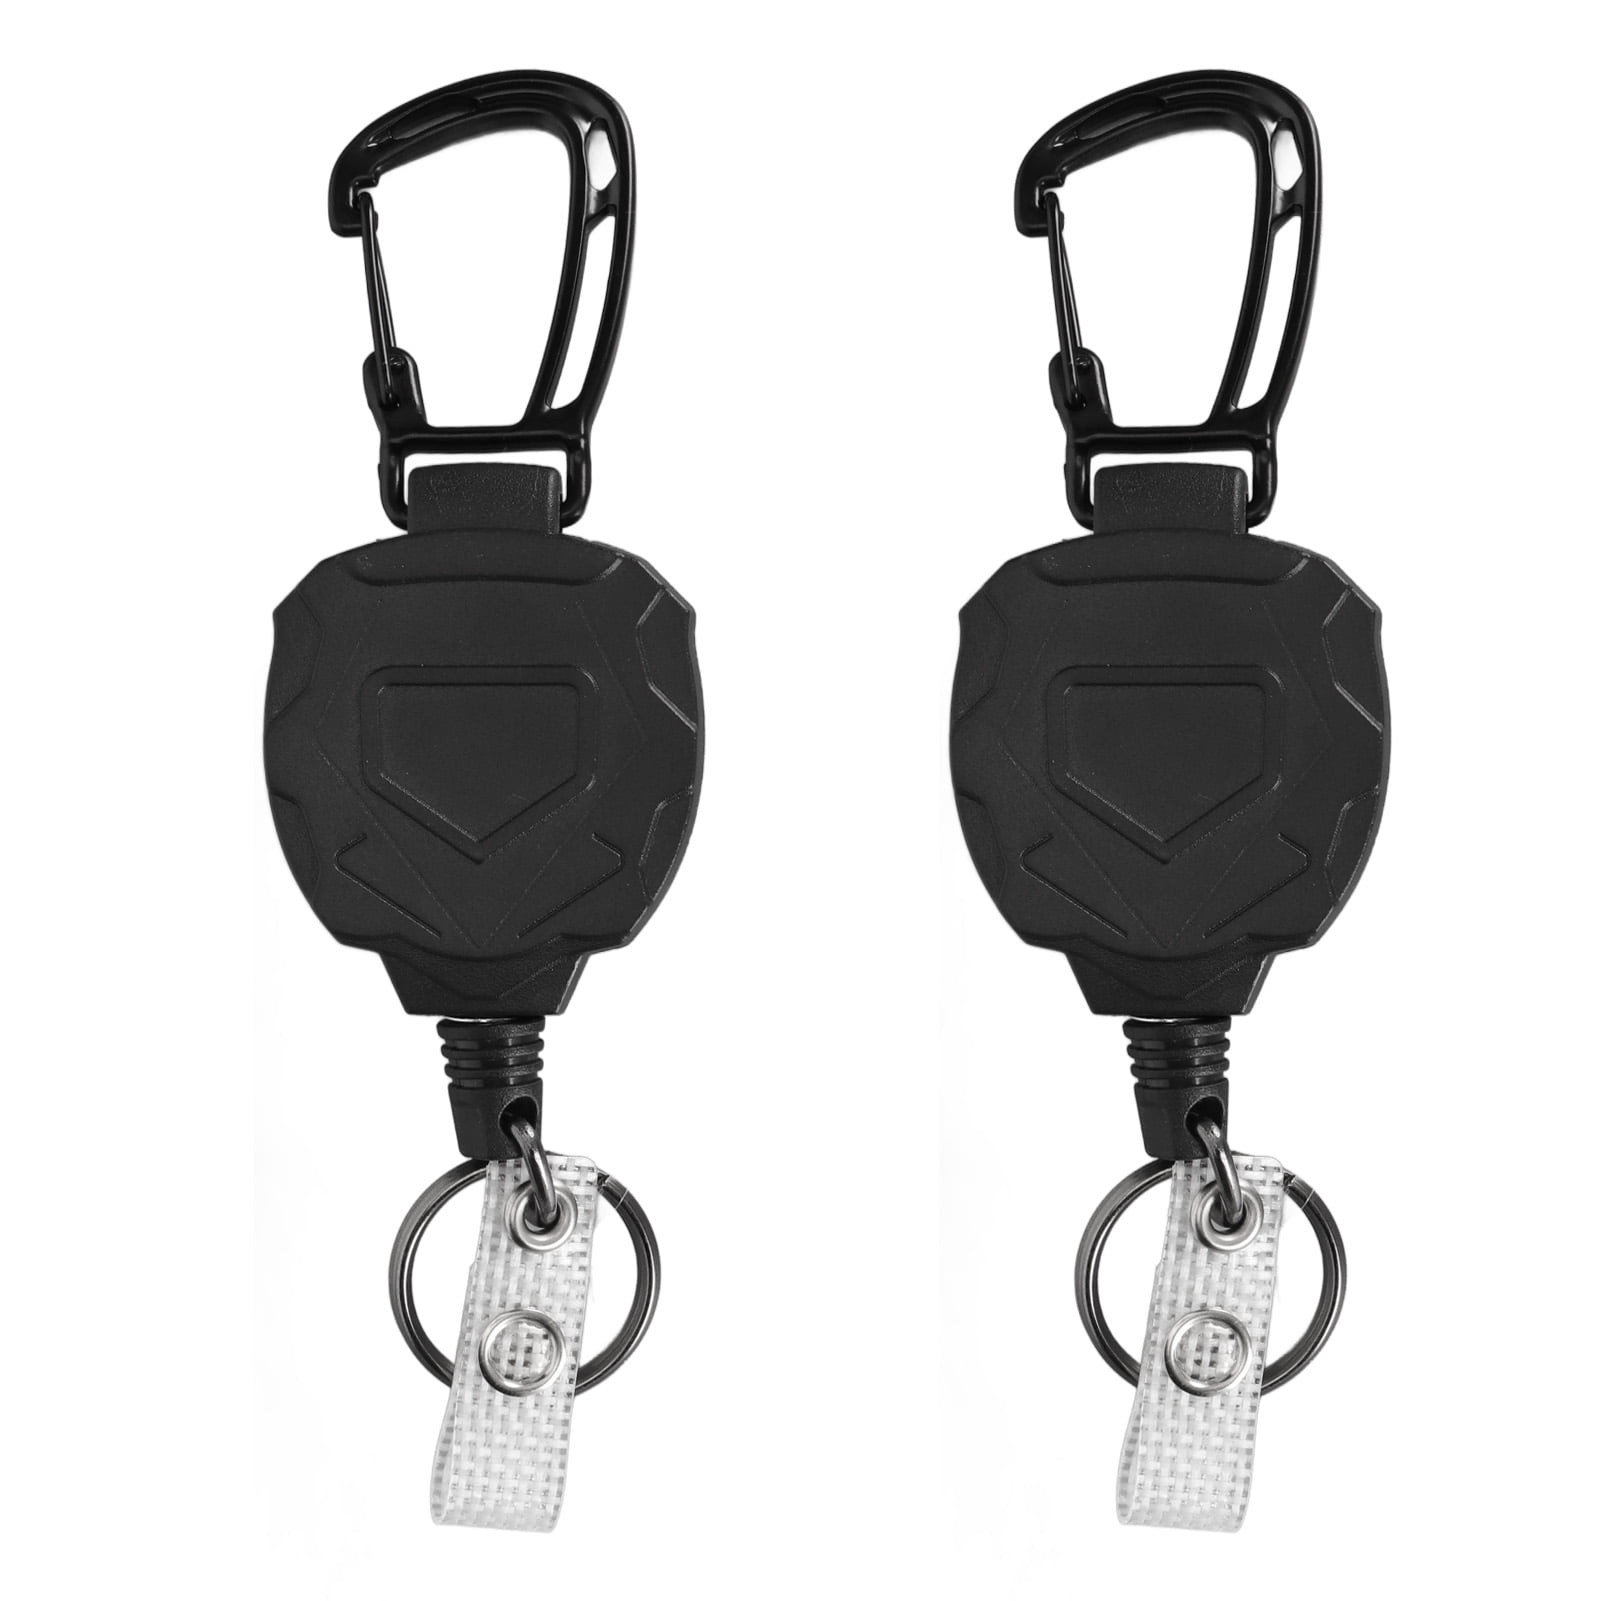 2PCS Retractable Keychain Magnetic Carabiner Belt Clip Key Ring with ...